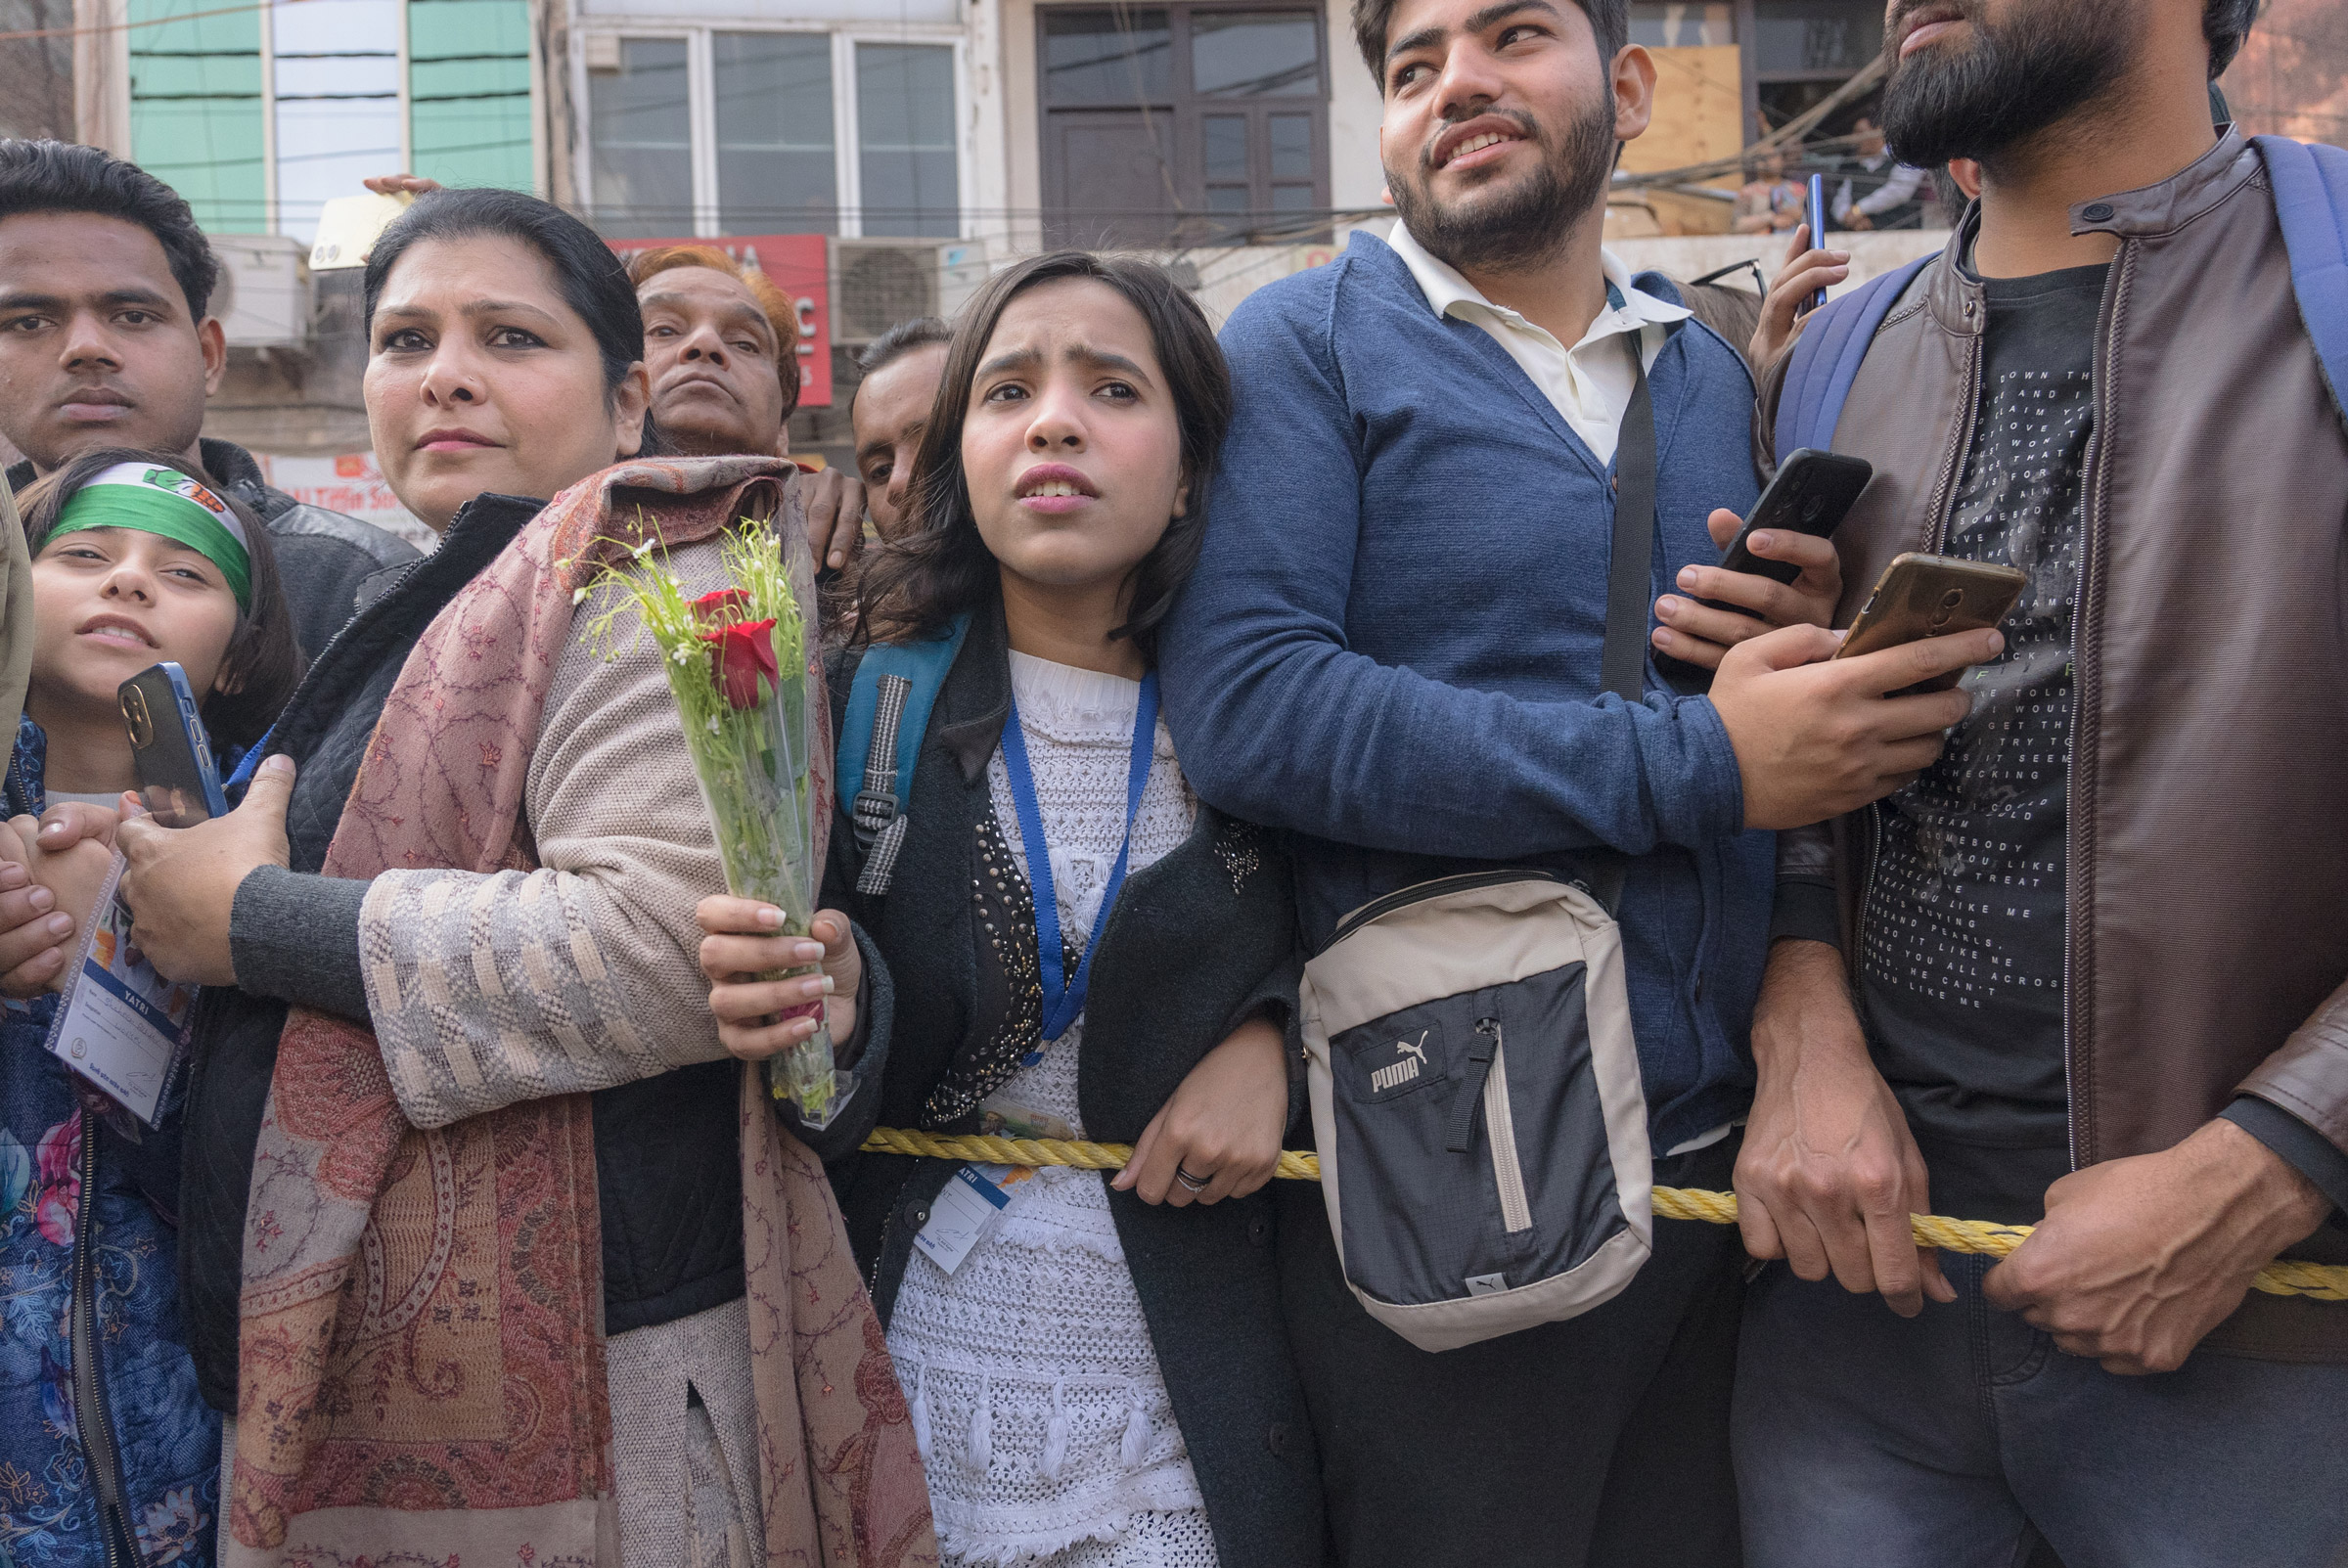 A girl tries to break from the crowd to present a bouquet of flowers to Rahul Gandhi in New Delhi, India, on Dec. 24, 2022. (Ronny Sen for TIME)